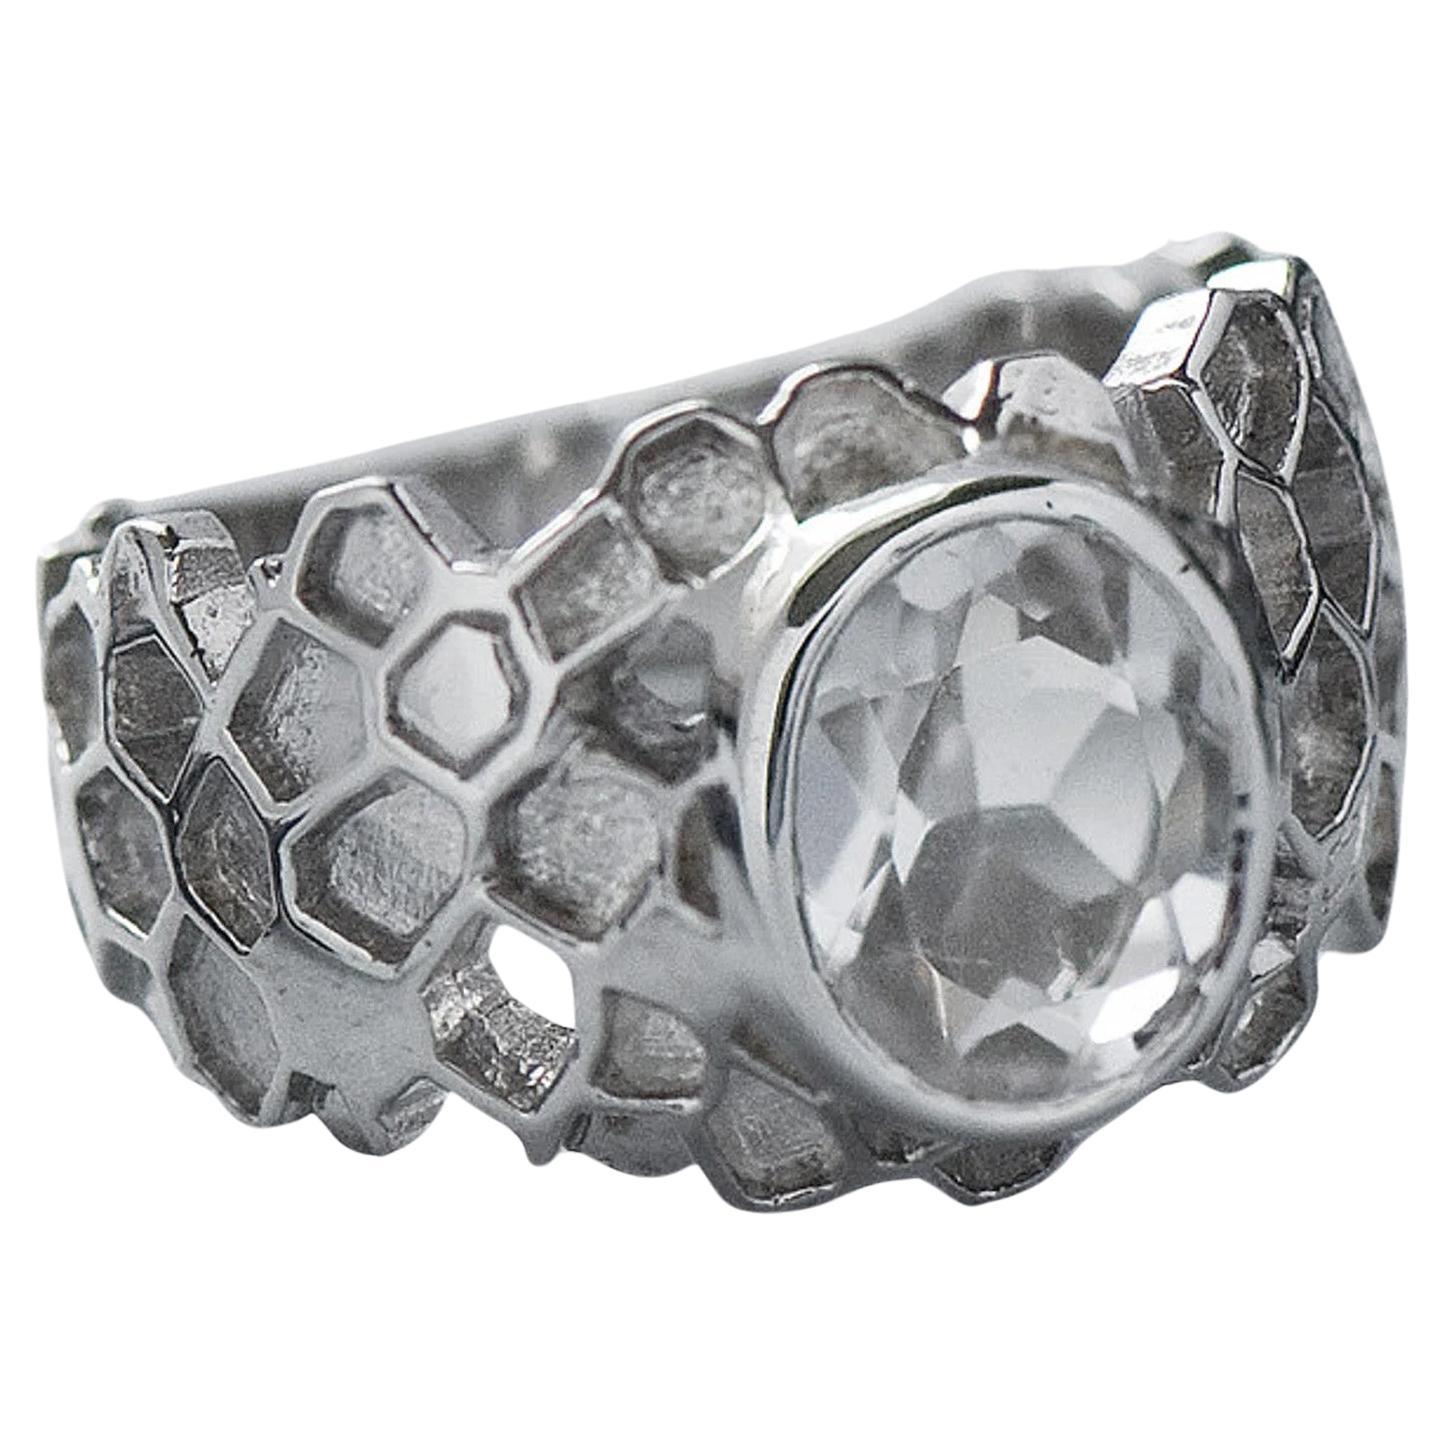 Honeycomb Rock Crystal Ring silver Oval Clear Quartz Natural Brazilian